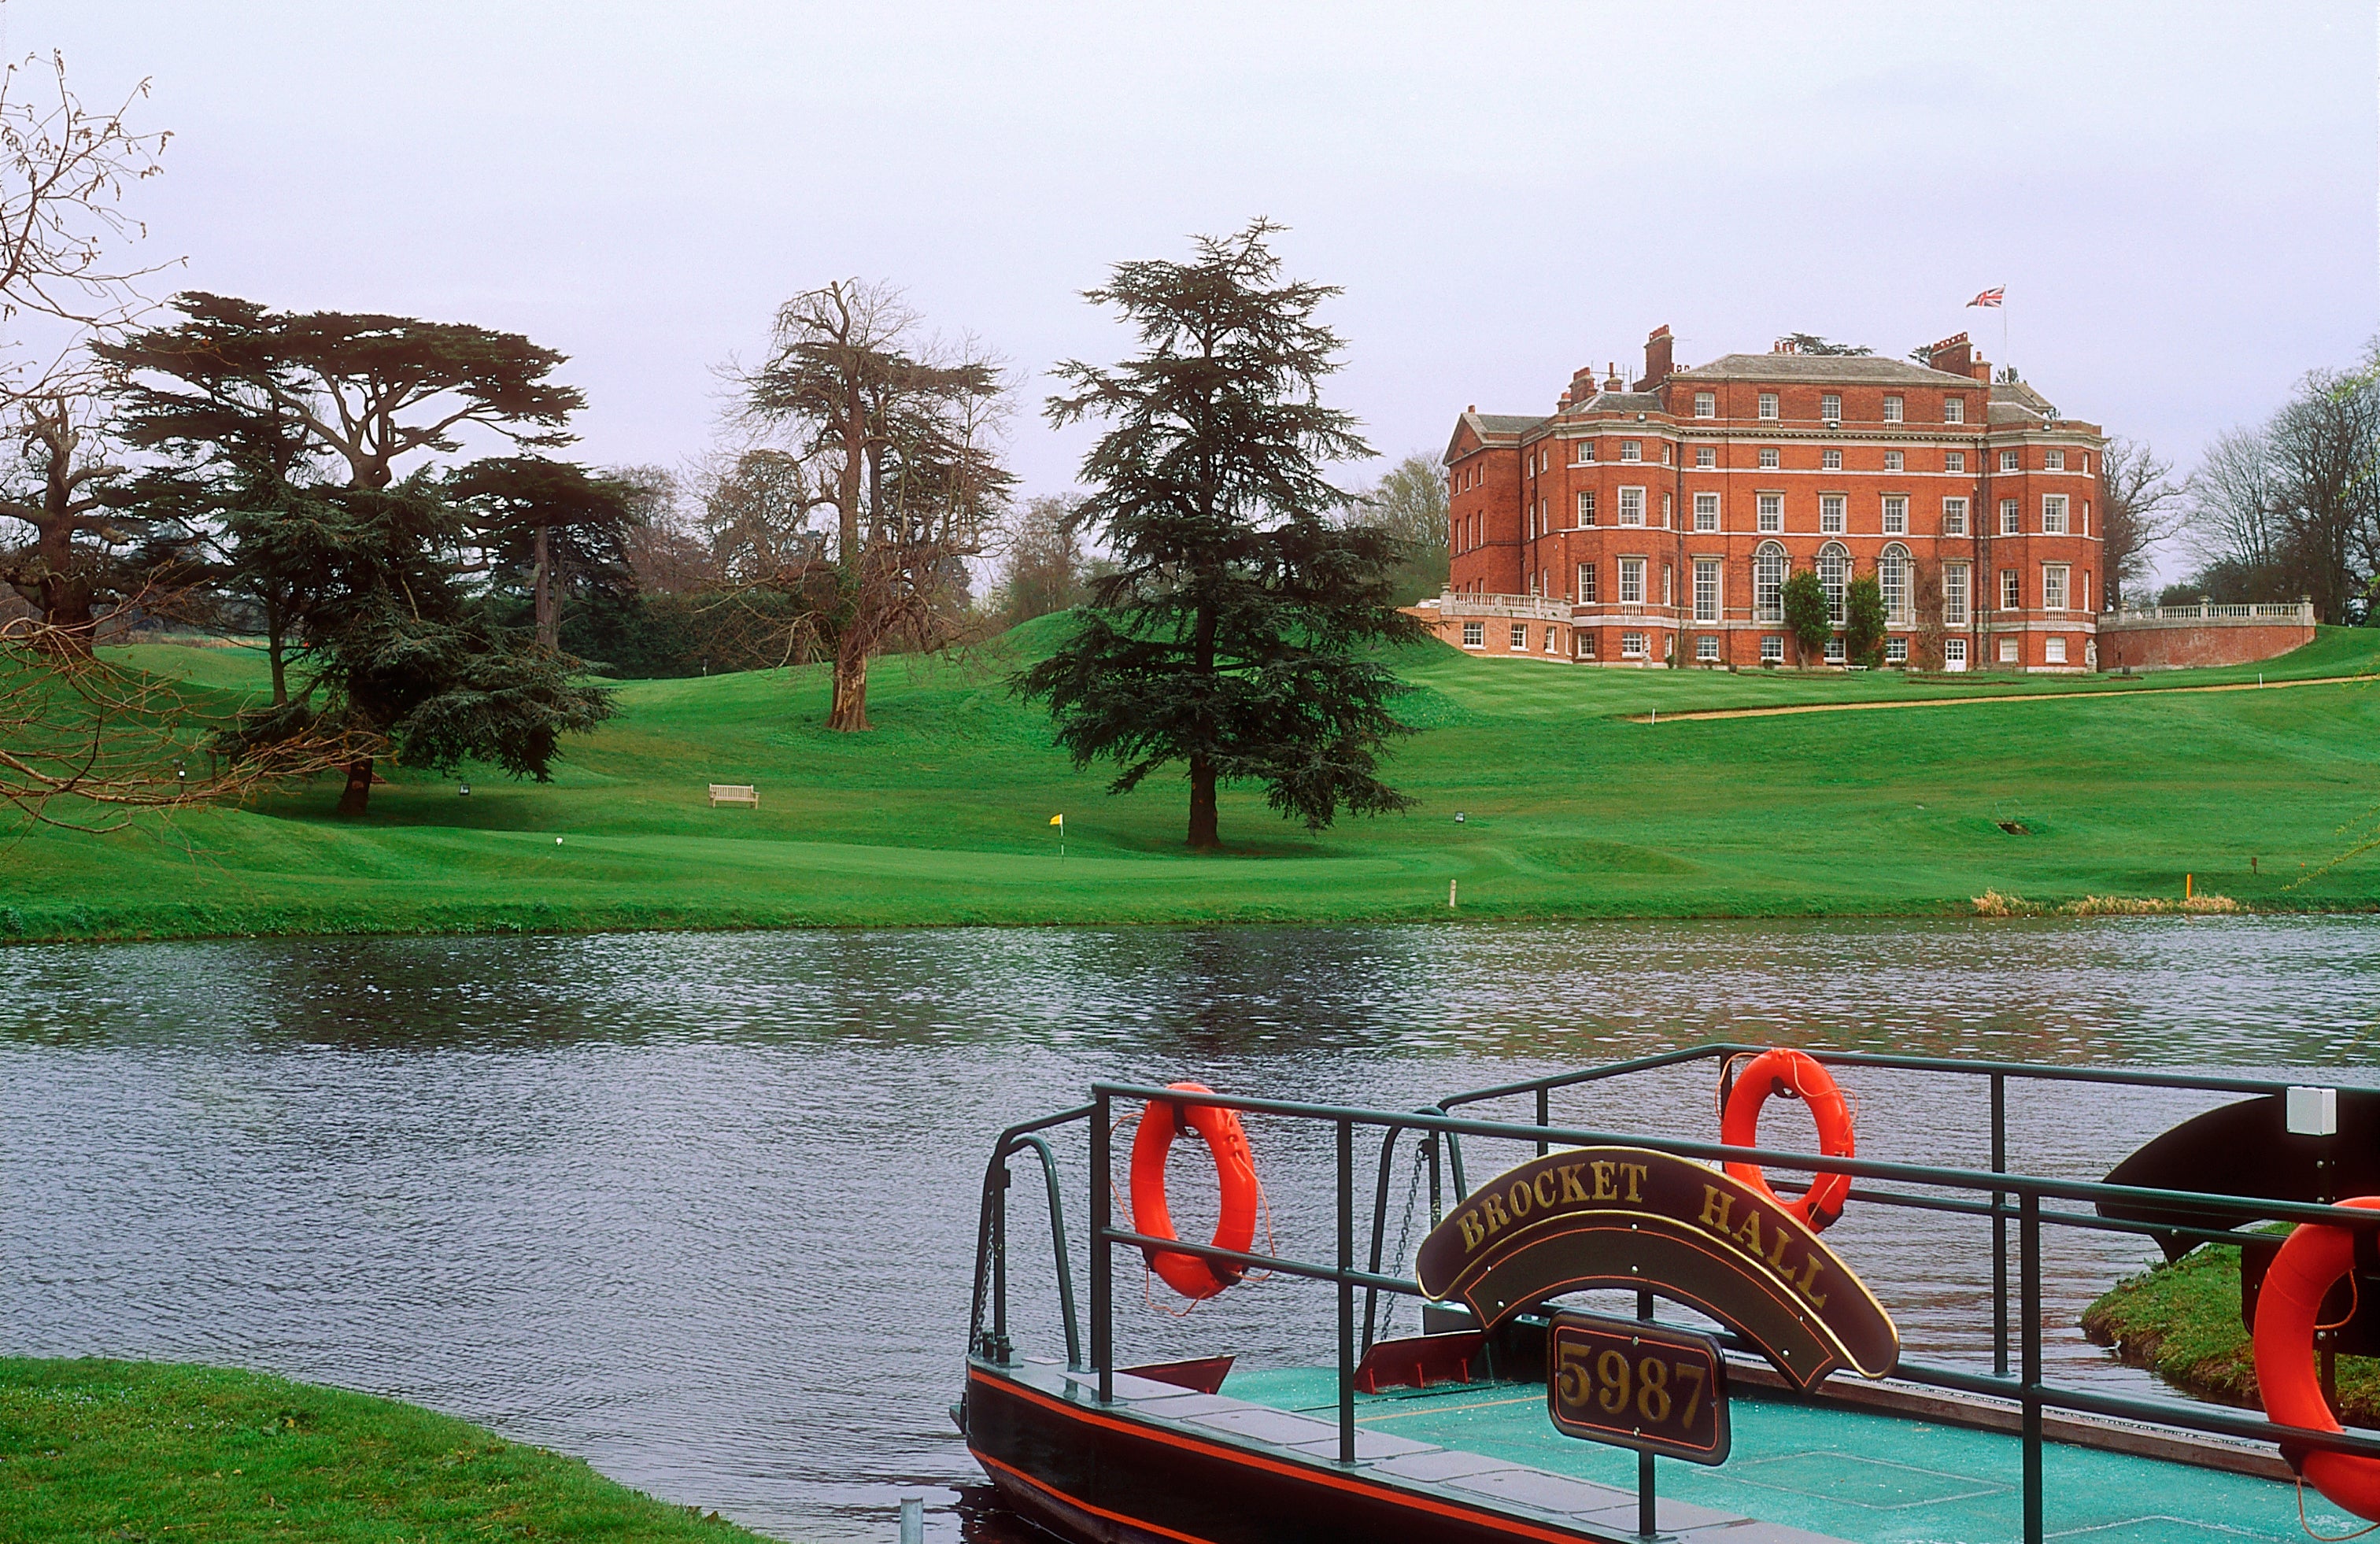 The idyllic setting at Brocket Hall Golf Club where a man was allegedly kidnapped